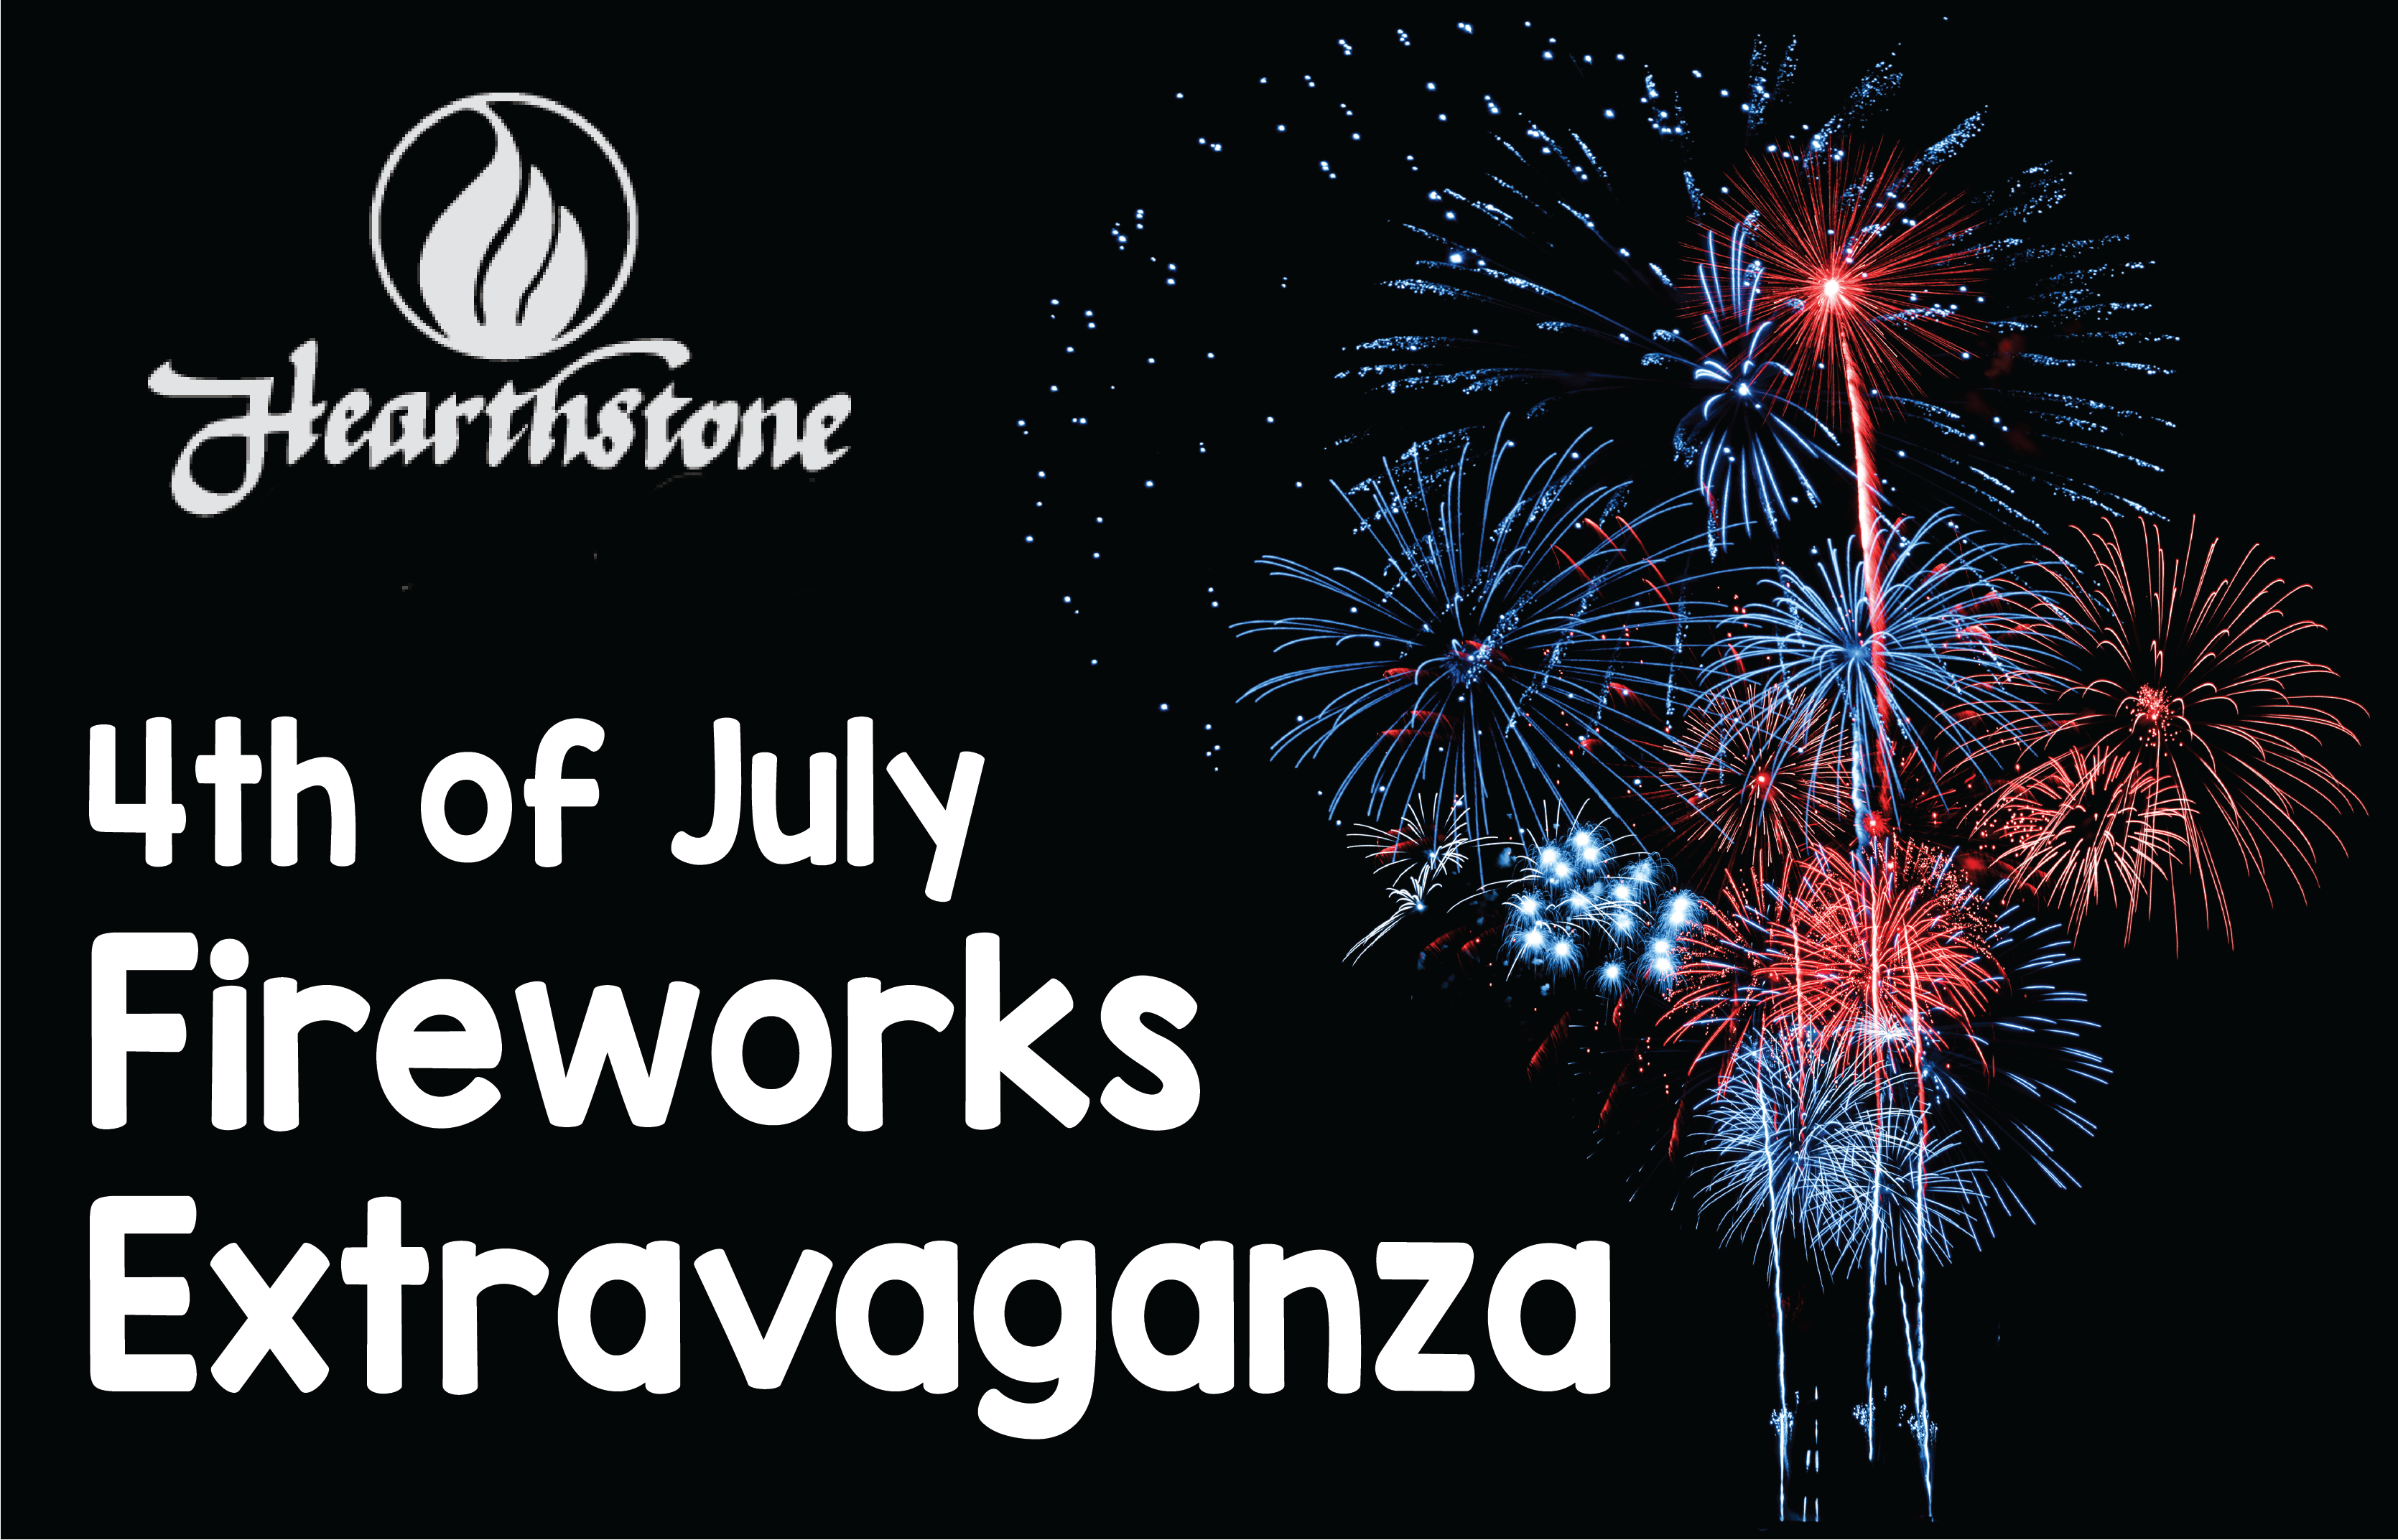 Get Ready to Light Up the Sky at the Hearthstone 4th of July Fireworks Extravaganza